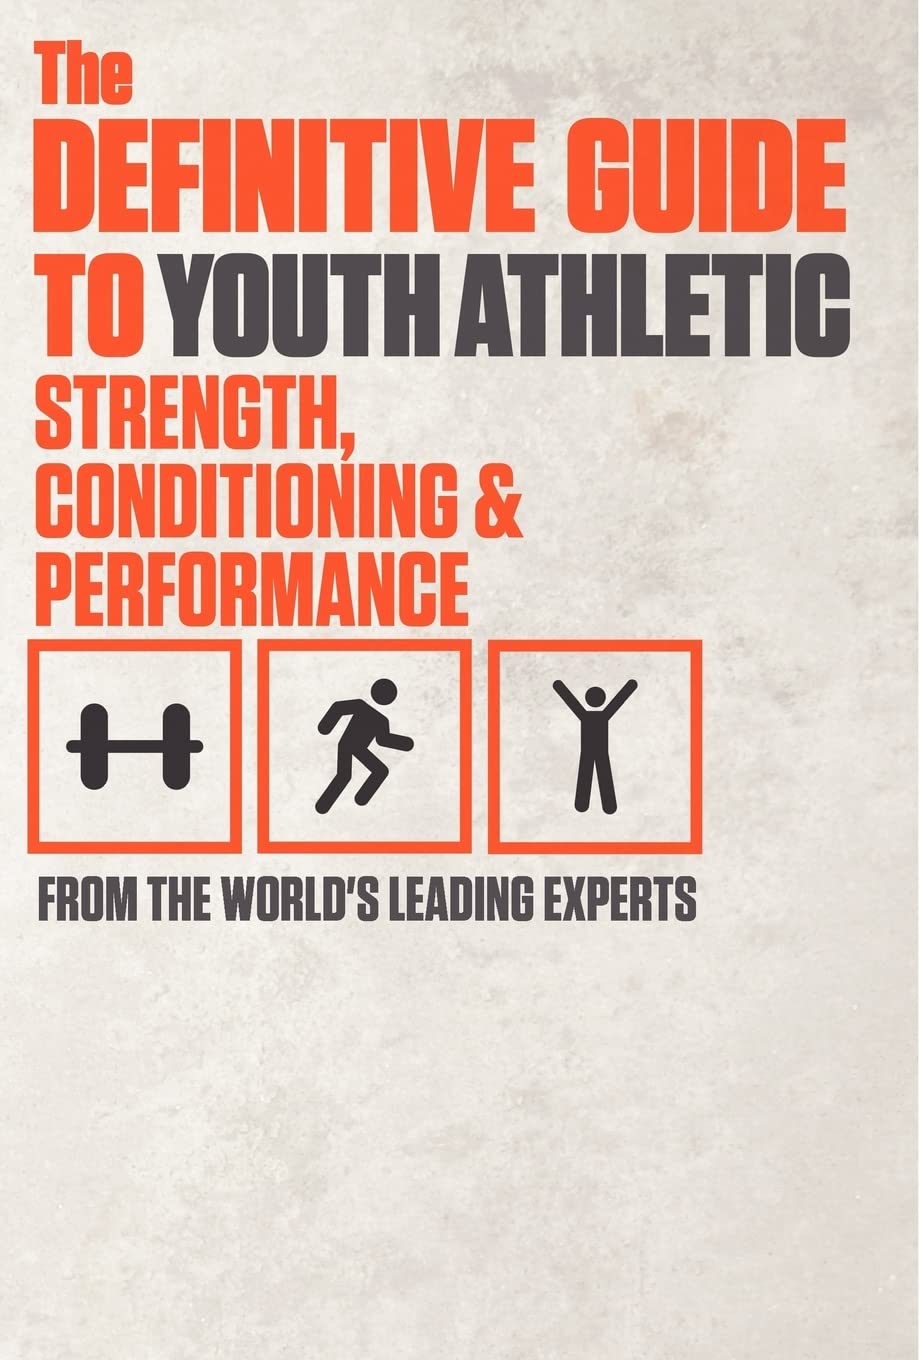 https://www.amazon.com/Definitive-Athletic-Strength-Conditioning-Performance/dp/098394704X/ref=sr_1_2?dchild=1&keywords=the+definitive+guide+to+youth&qid=1590820878&sr=8-2